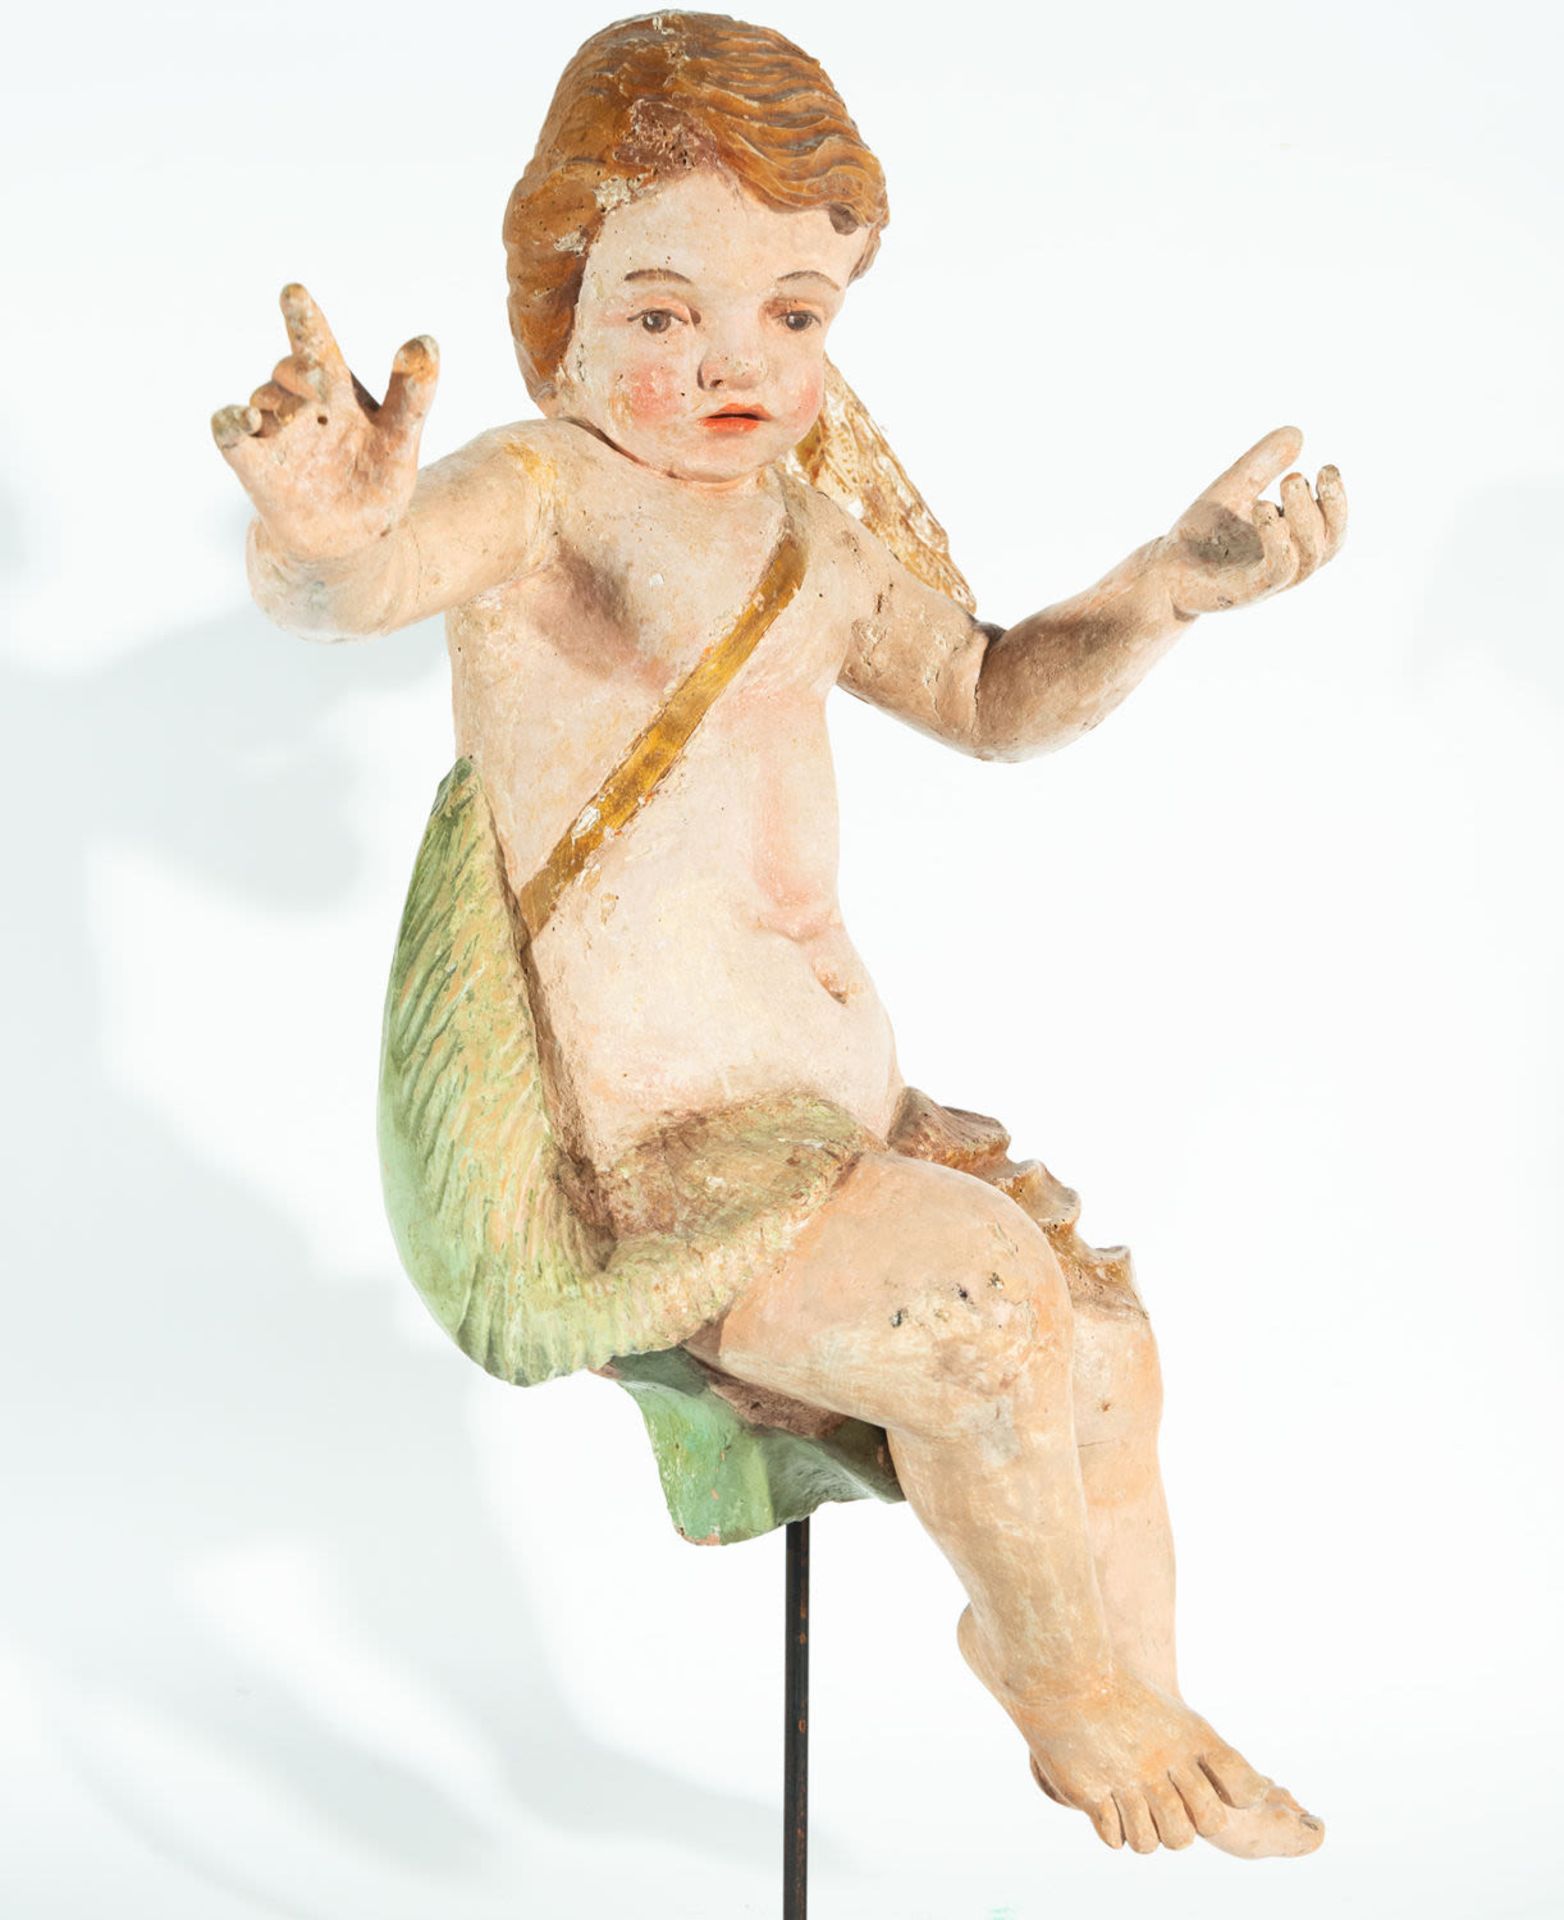 Angel in Polychrome Wood, Venice, Italy, 18th century - Image 3 of 4